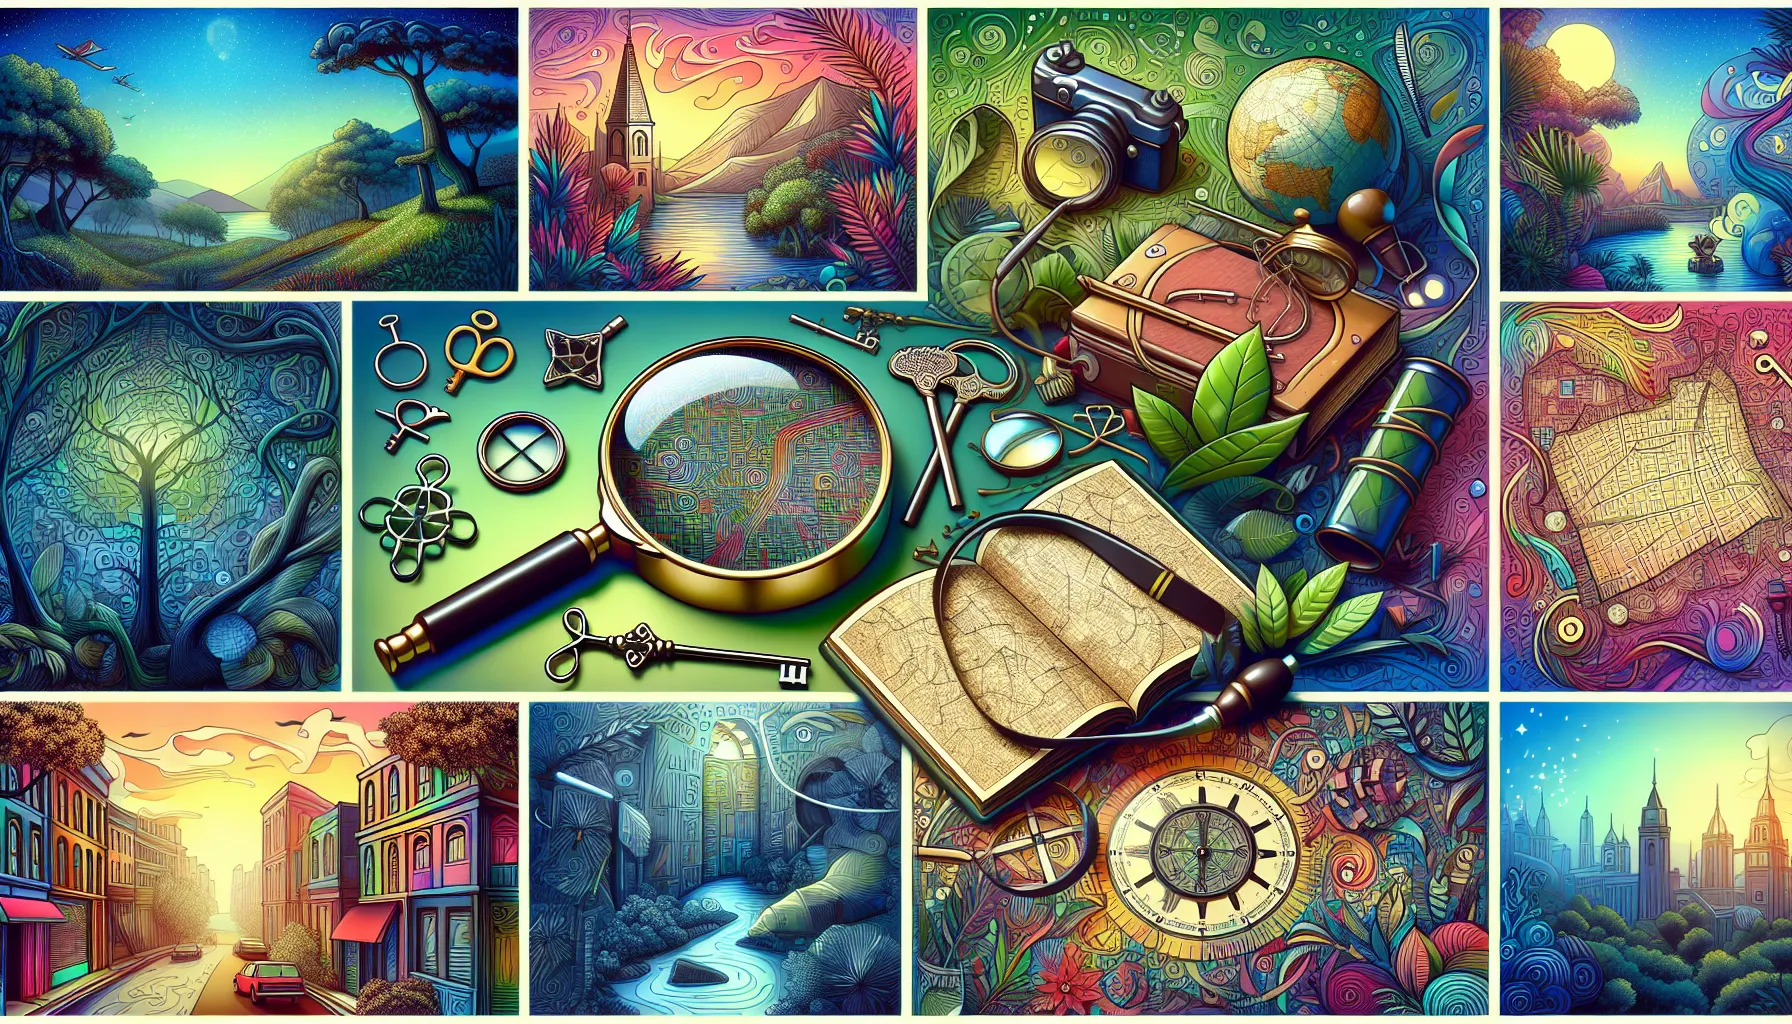 Journey through riddles and rhymes, where each hidden token leads to moments of laughter and discovery, weaving love's adventure with threads of playful curiosity.